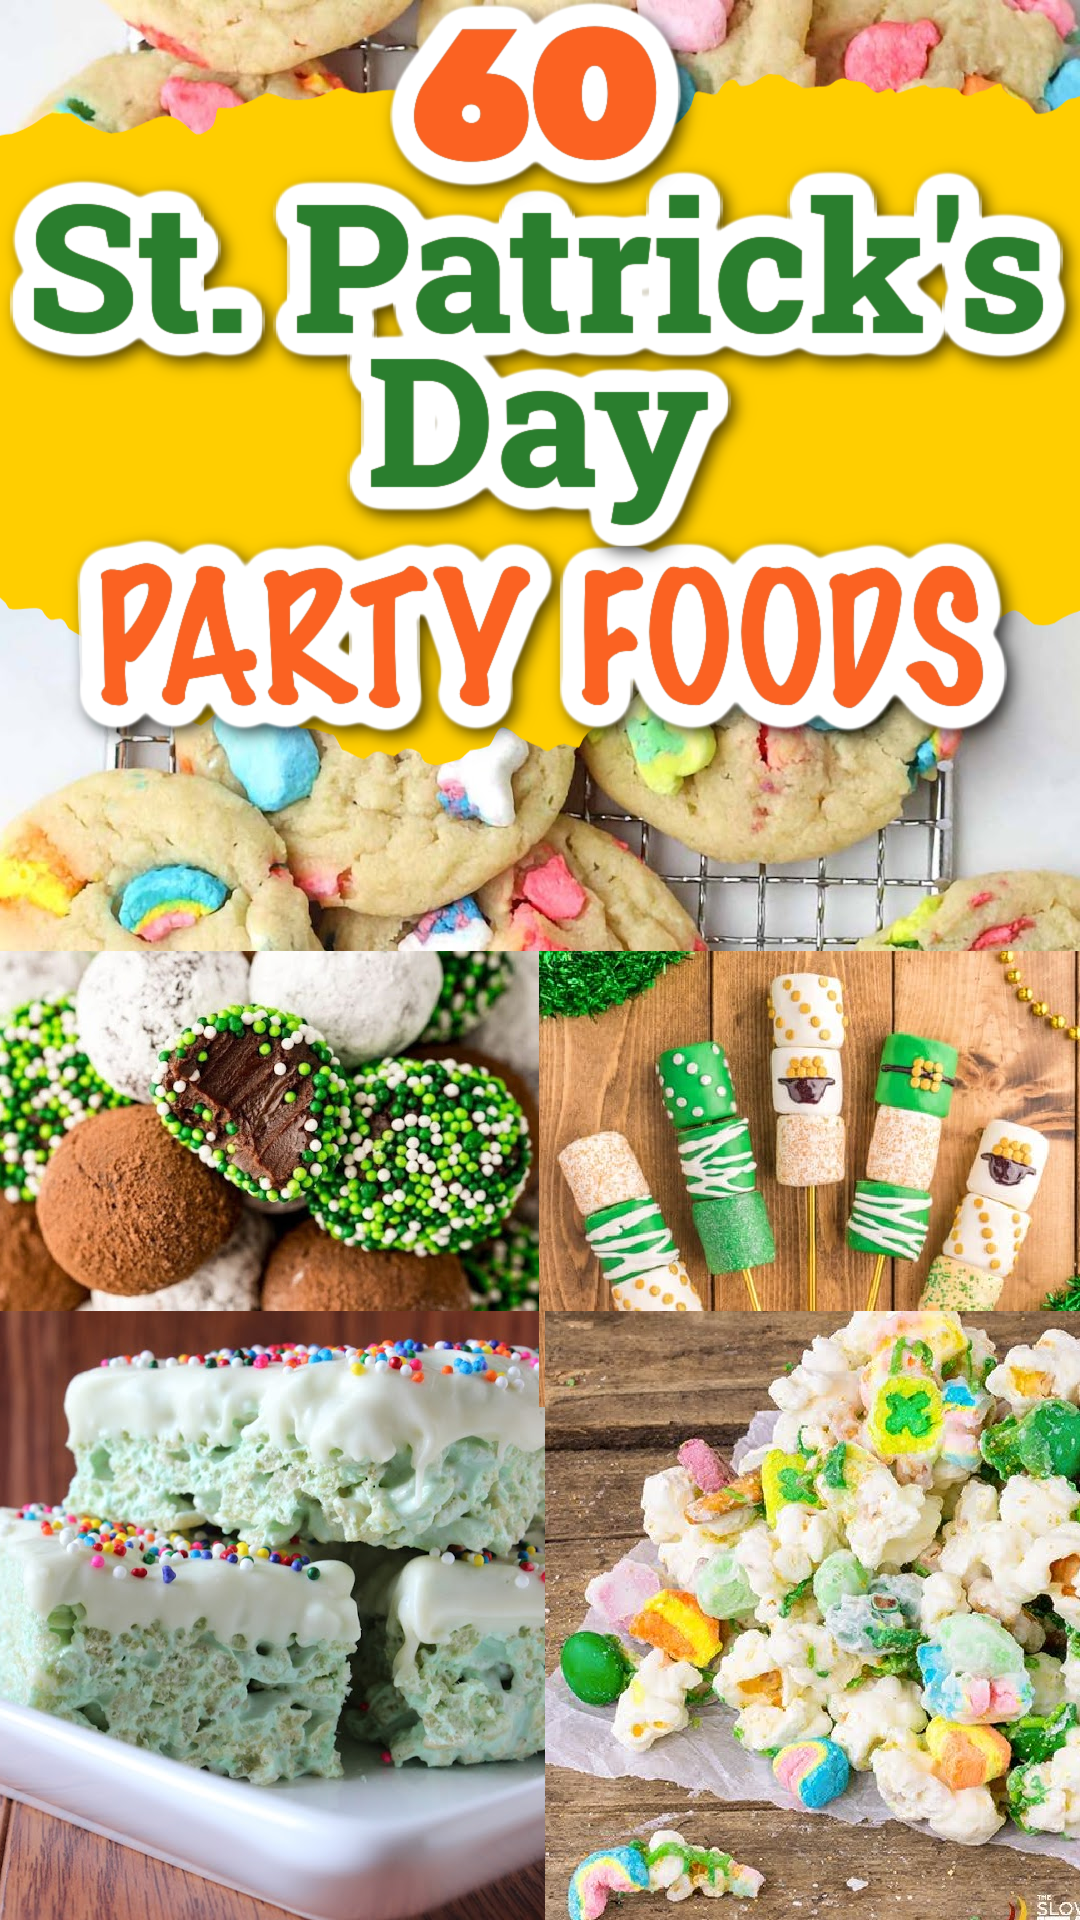 A collage of festive St. Patrick's Day party foods including Irish recipes, treats, jello shots and cocktails.